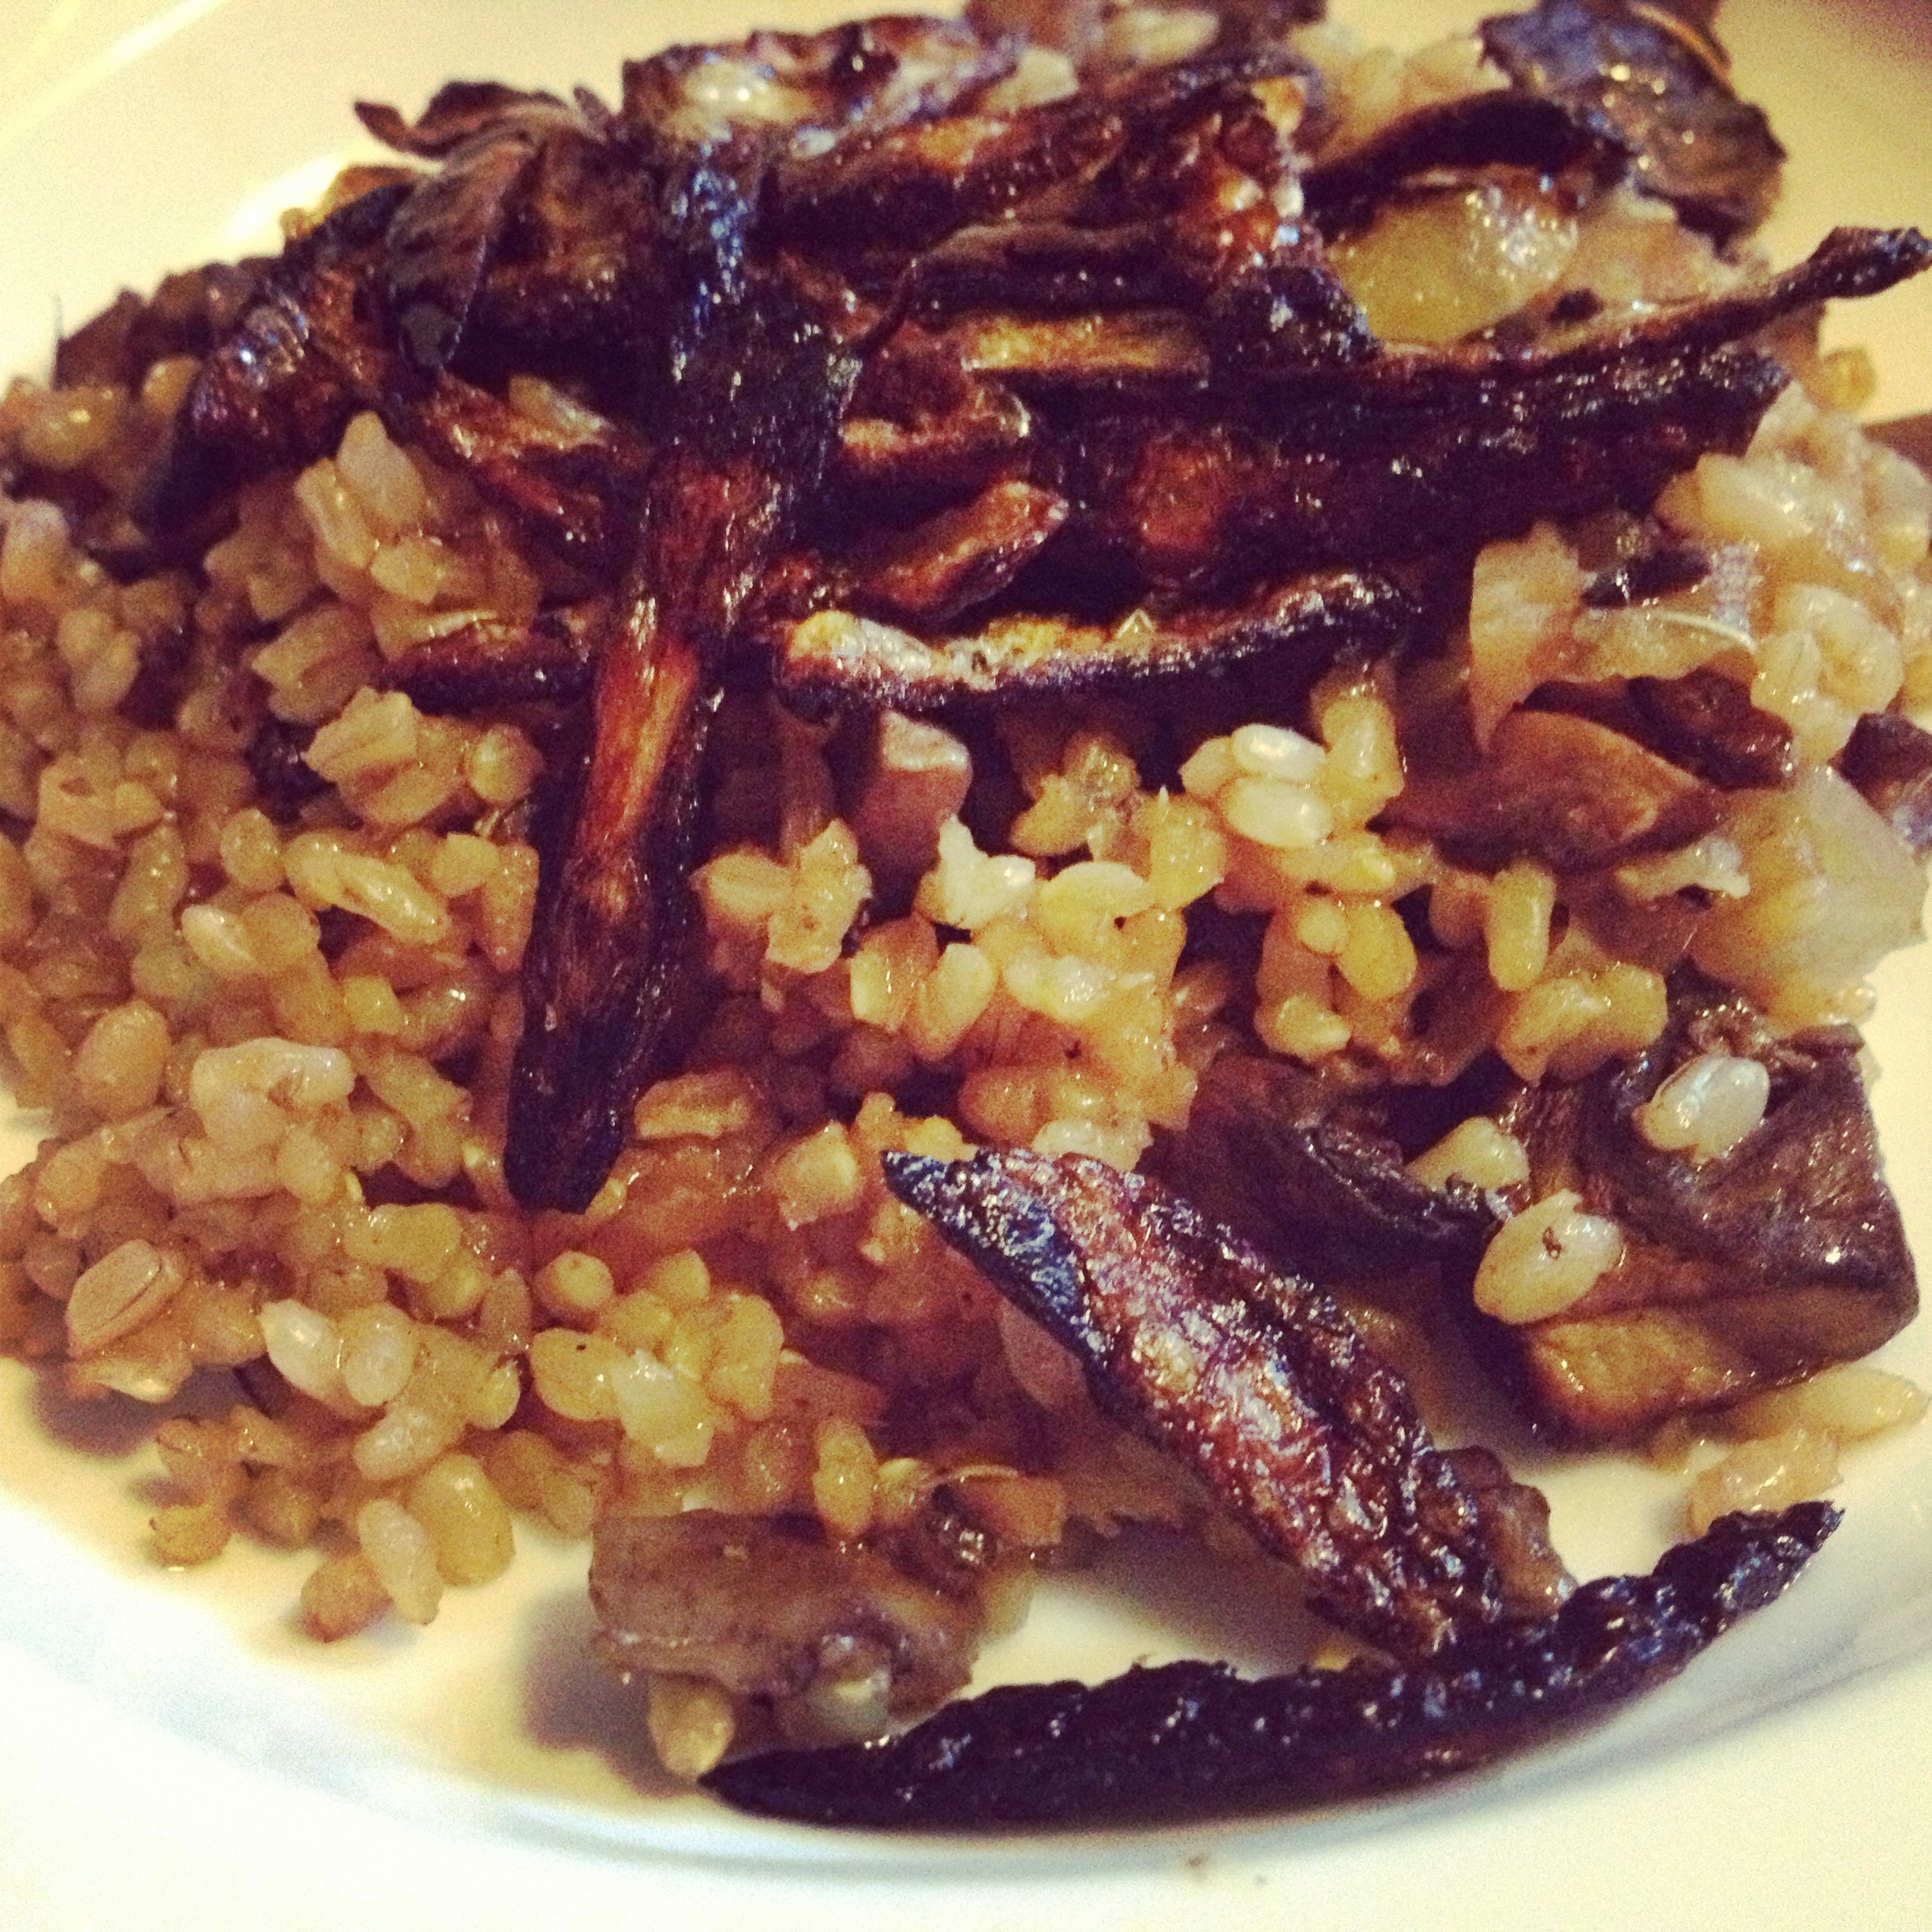 Brown rice risotto with onions